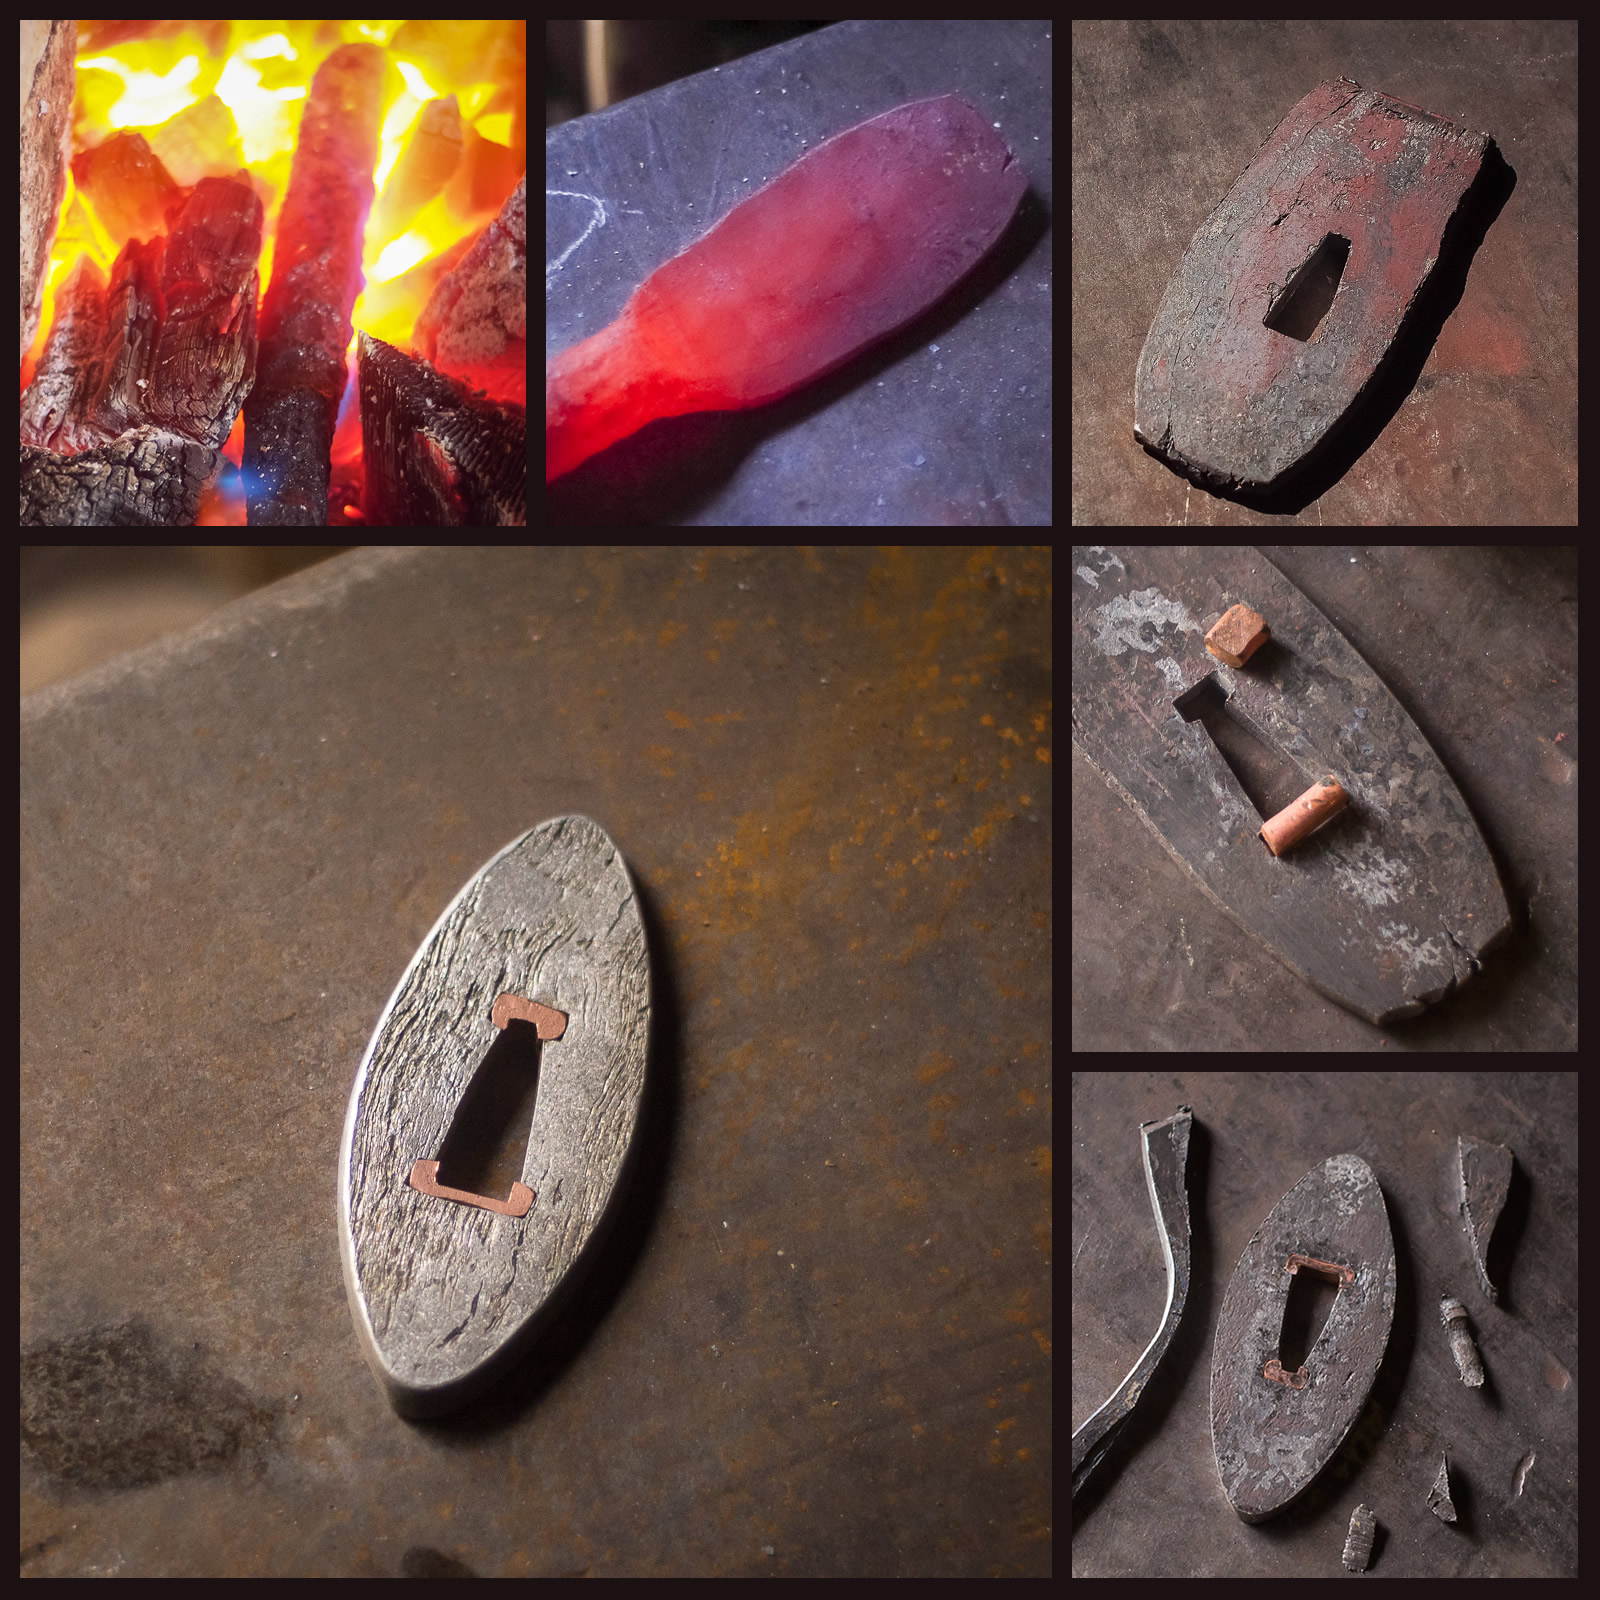 Island Blacksmith: Charcoal forged nihonto made from reclaimed and natural materials using traditional techniques